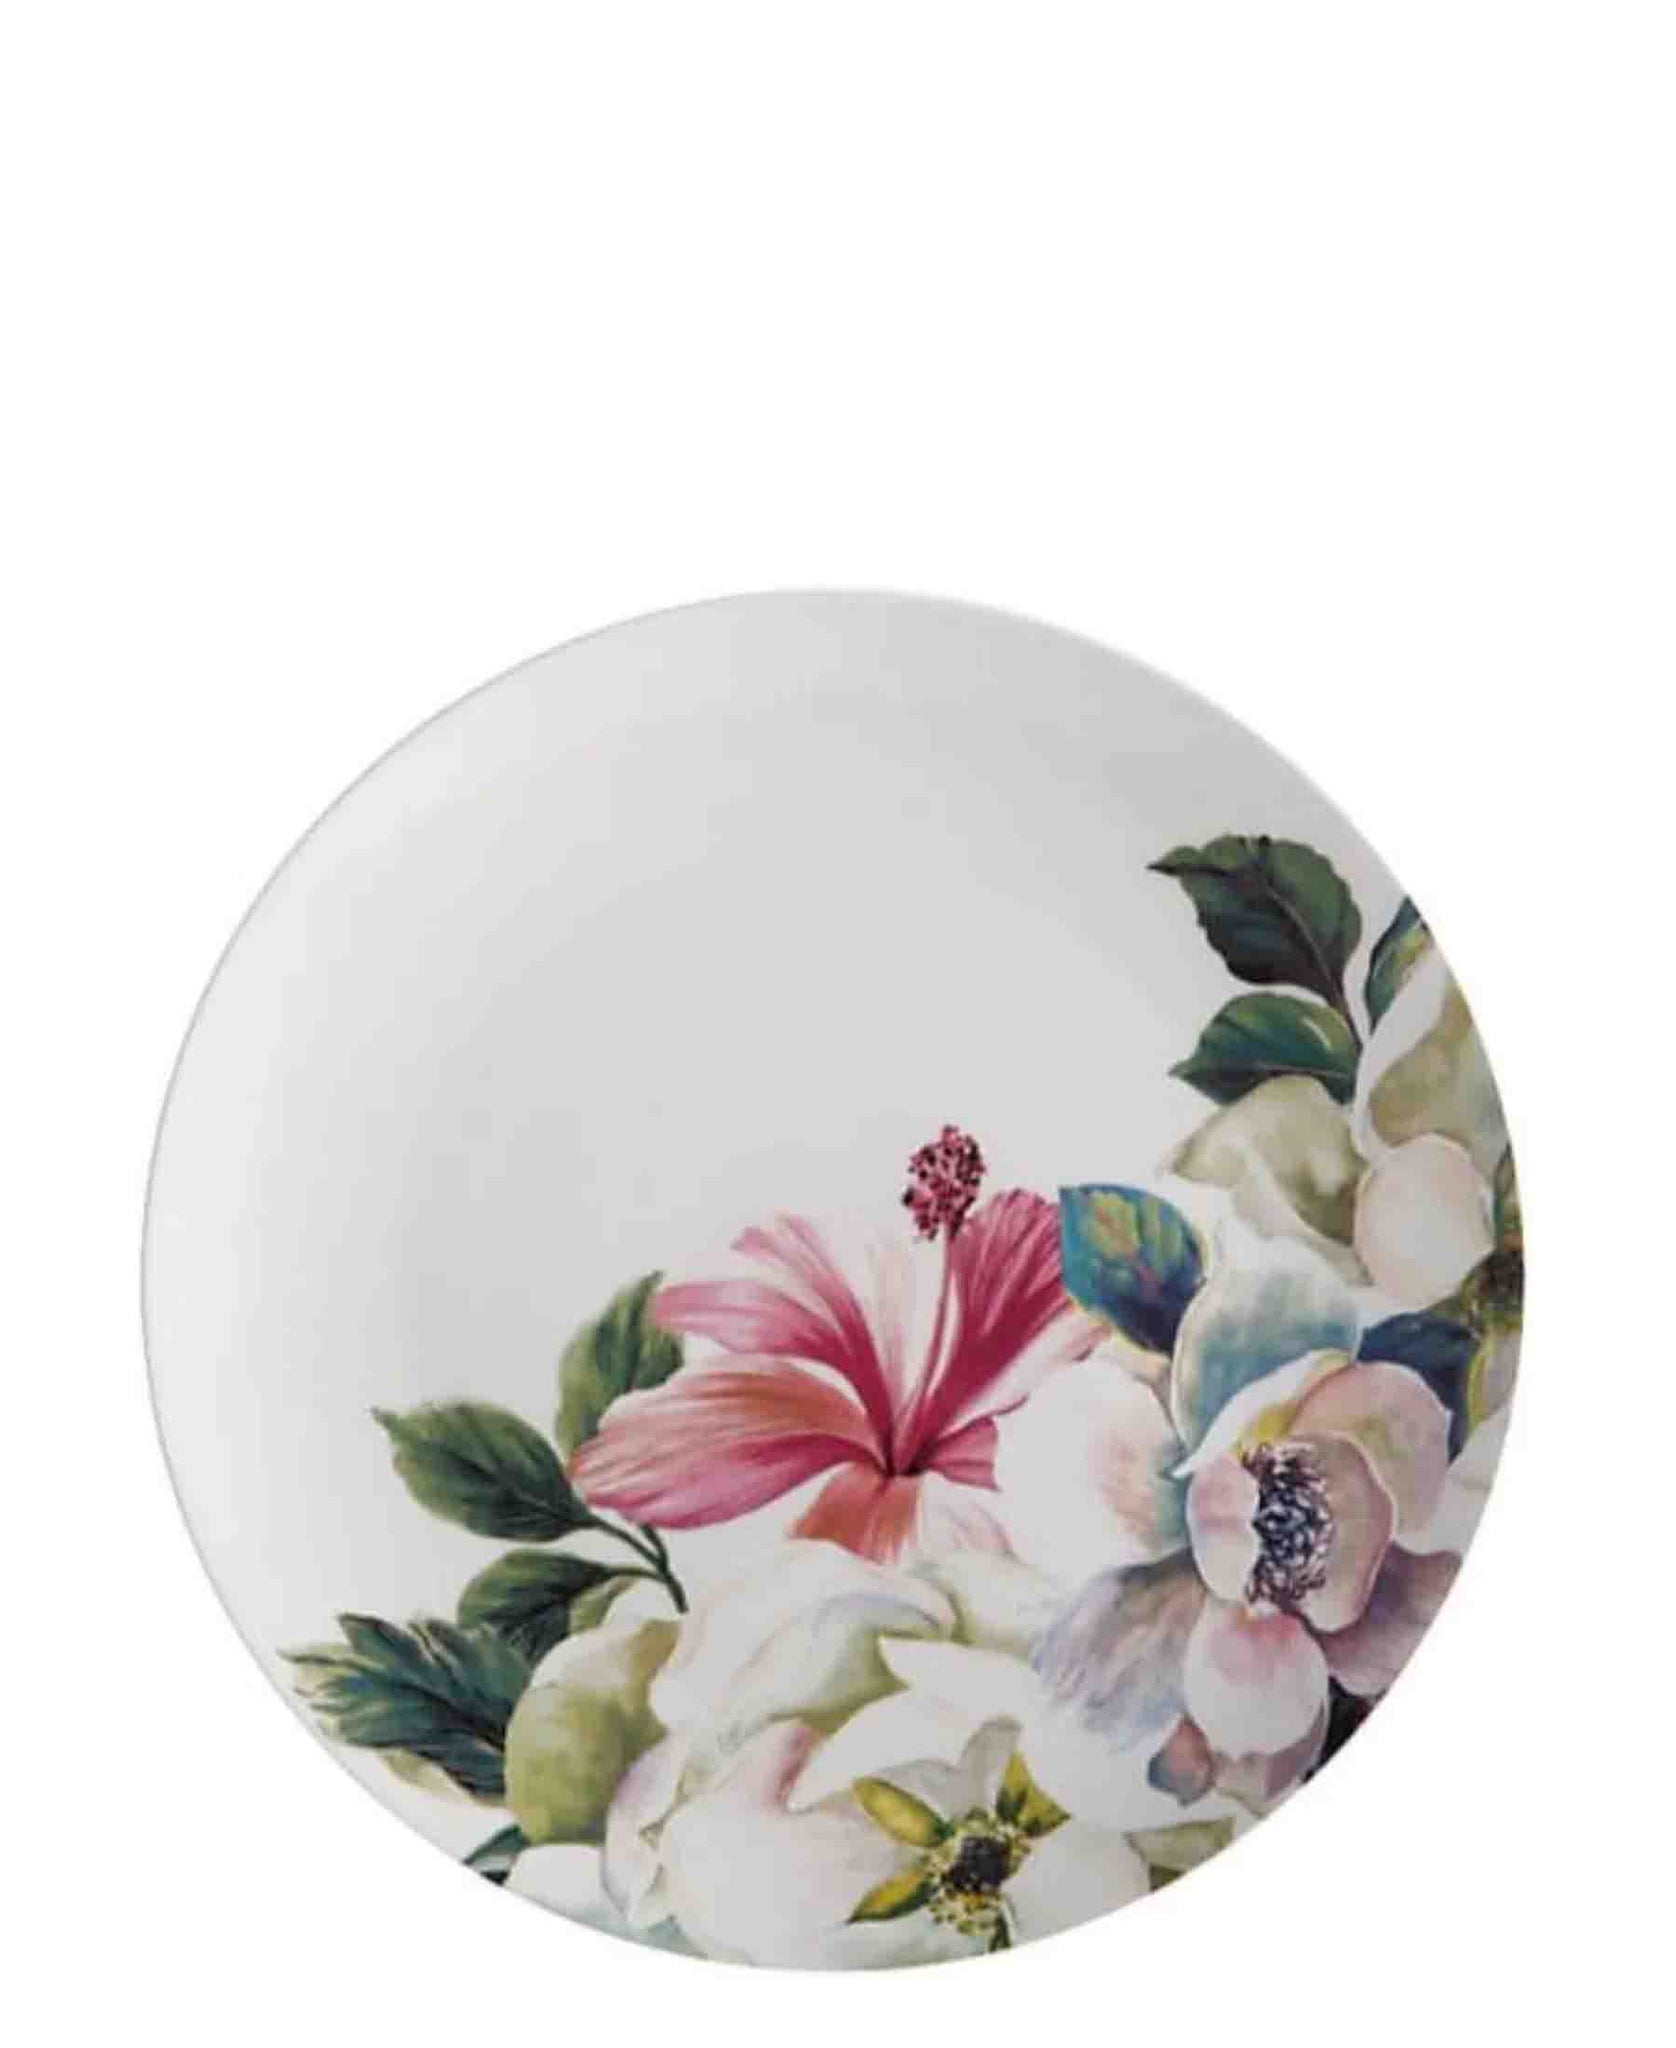 Maxwell & Williams Magnolia Dinner Plate 26.5cm - White & Pink